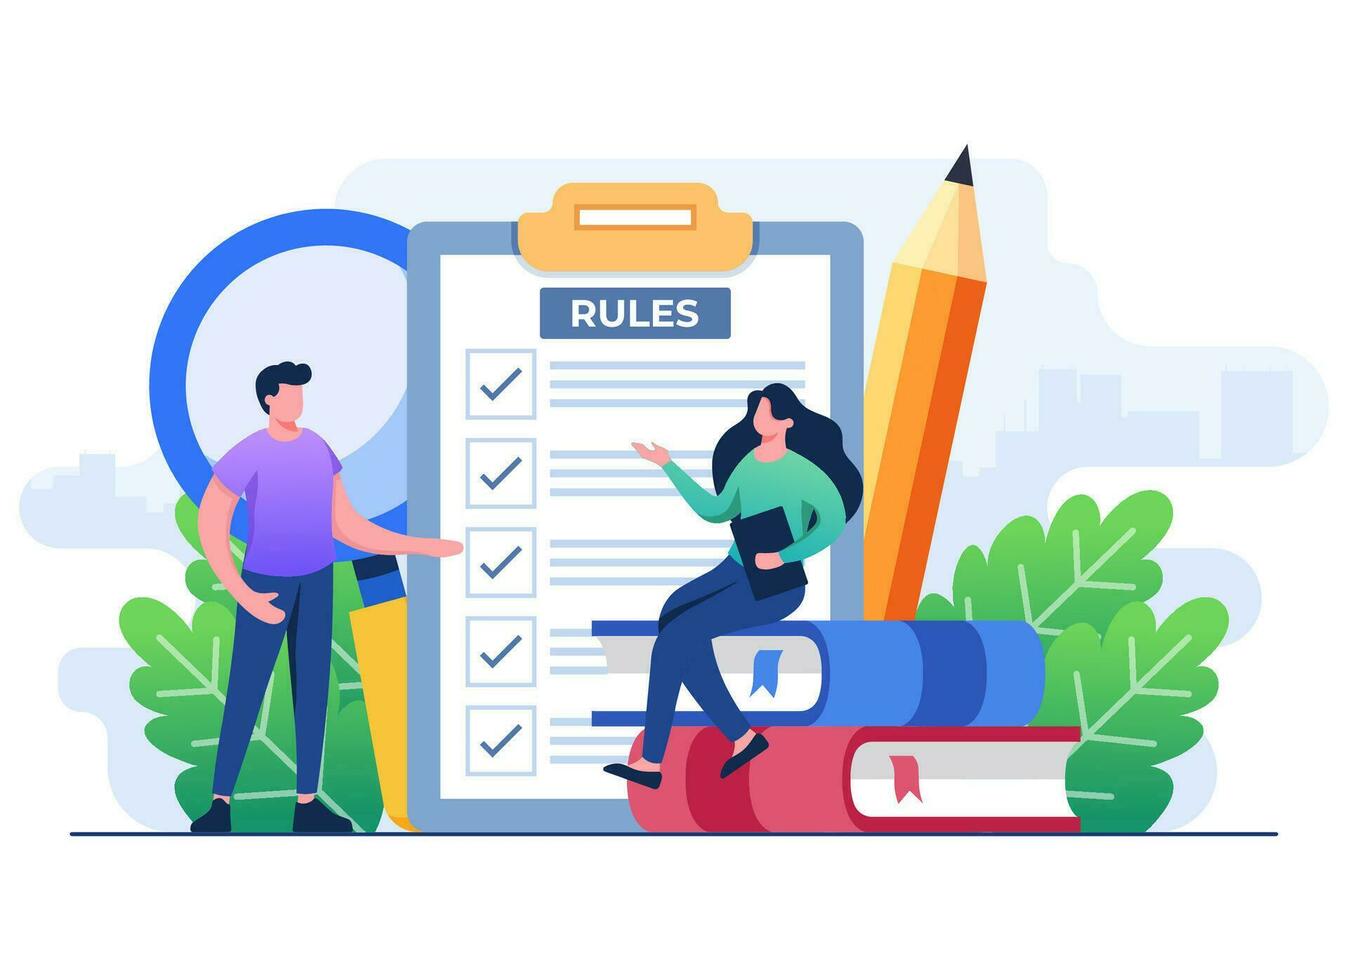 People discuss company rules and regulations, Agreement, Corporate law and business ethics, Compliance, Company policy concept for web design, infographic, landing page, social media, app vector